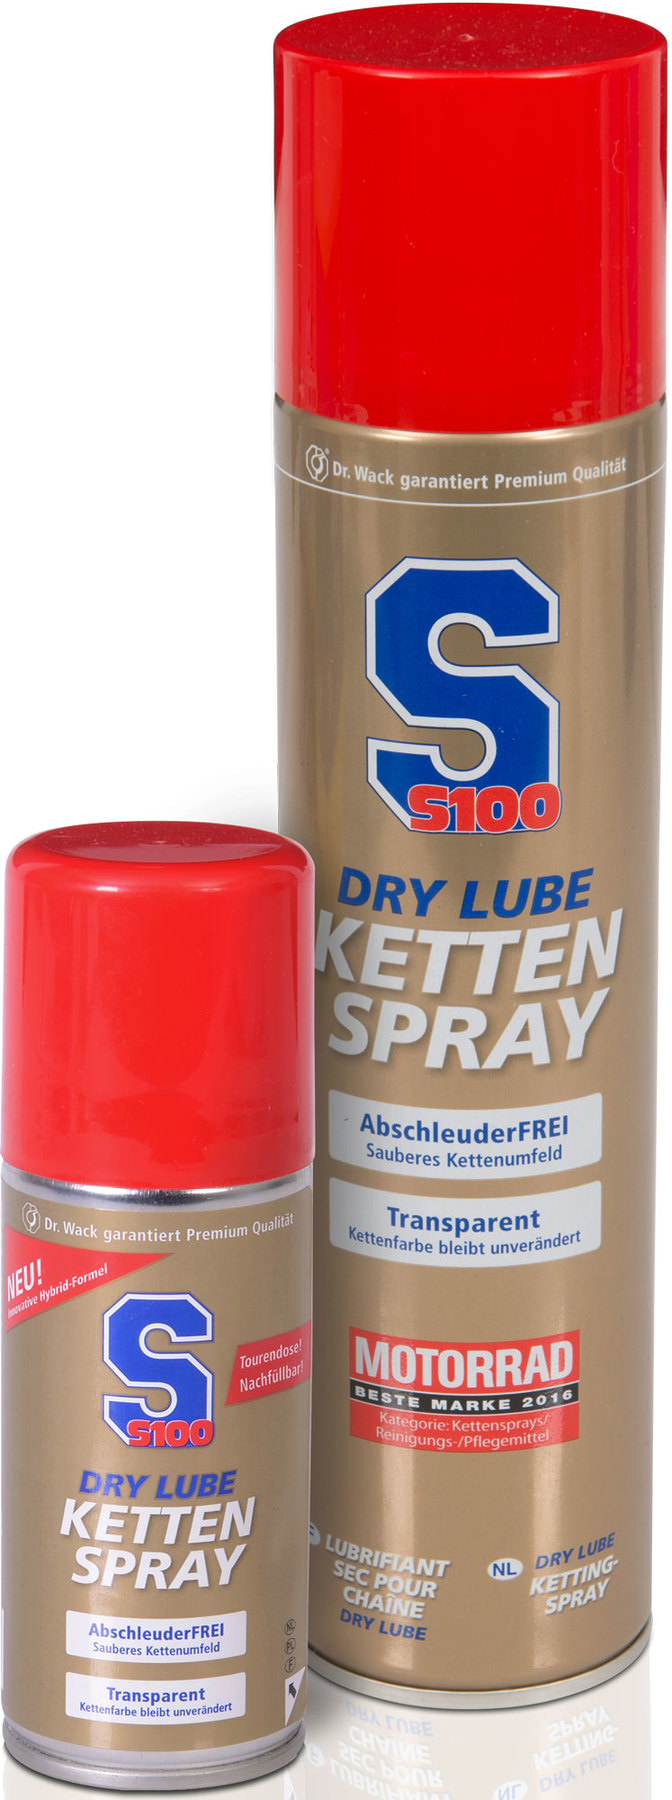 Nettoyage / graissage transmission - Page 2 32.22.f3.S100Kettenspray10039036970GRP0117